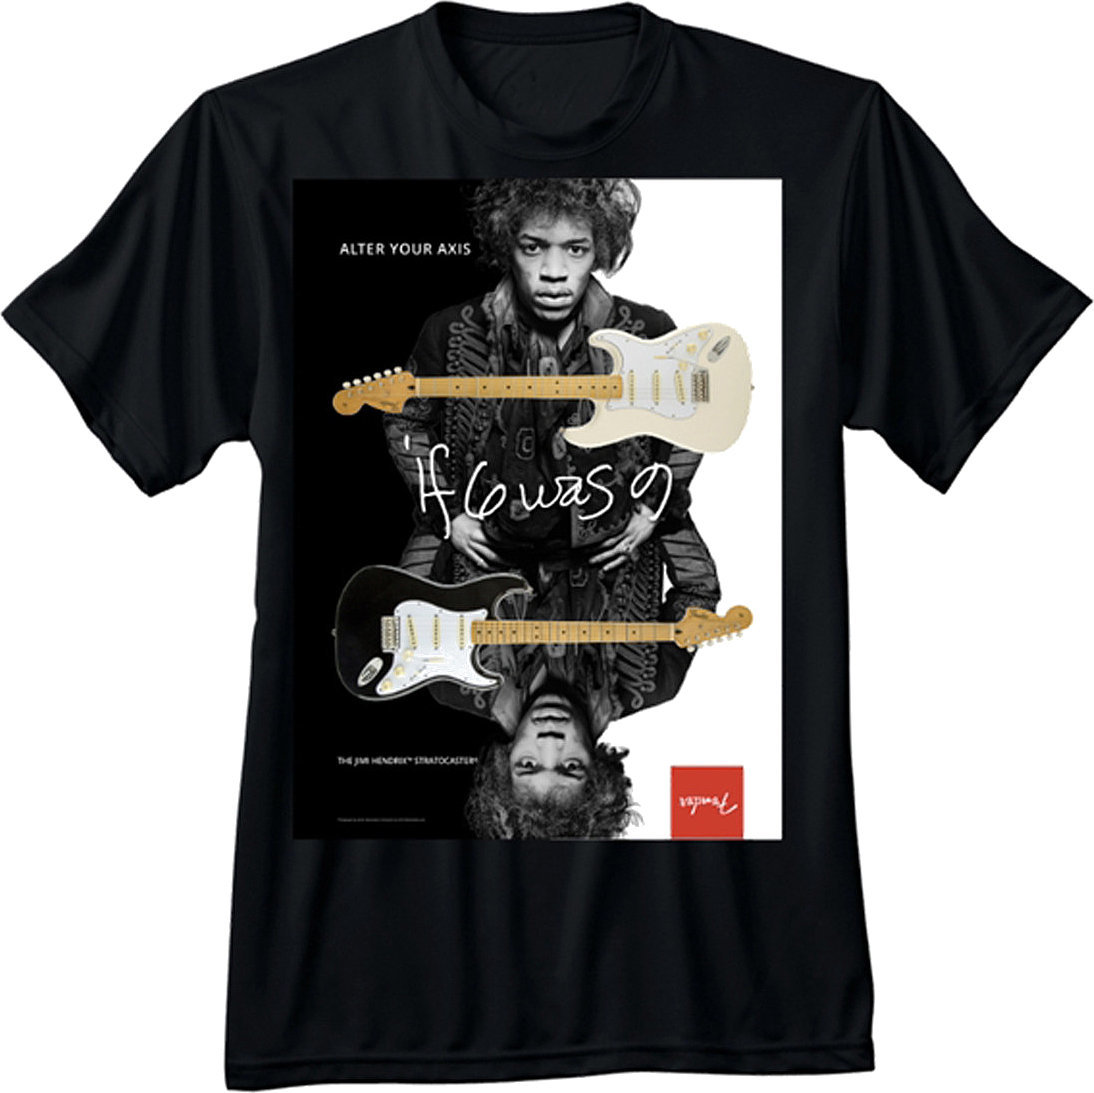 Skjorta Fender Jimi Hendrix Collection Alter Your Axis T-Shirt Black M